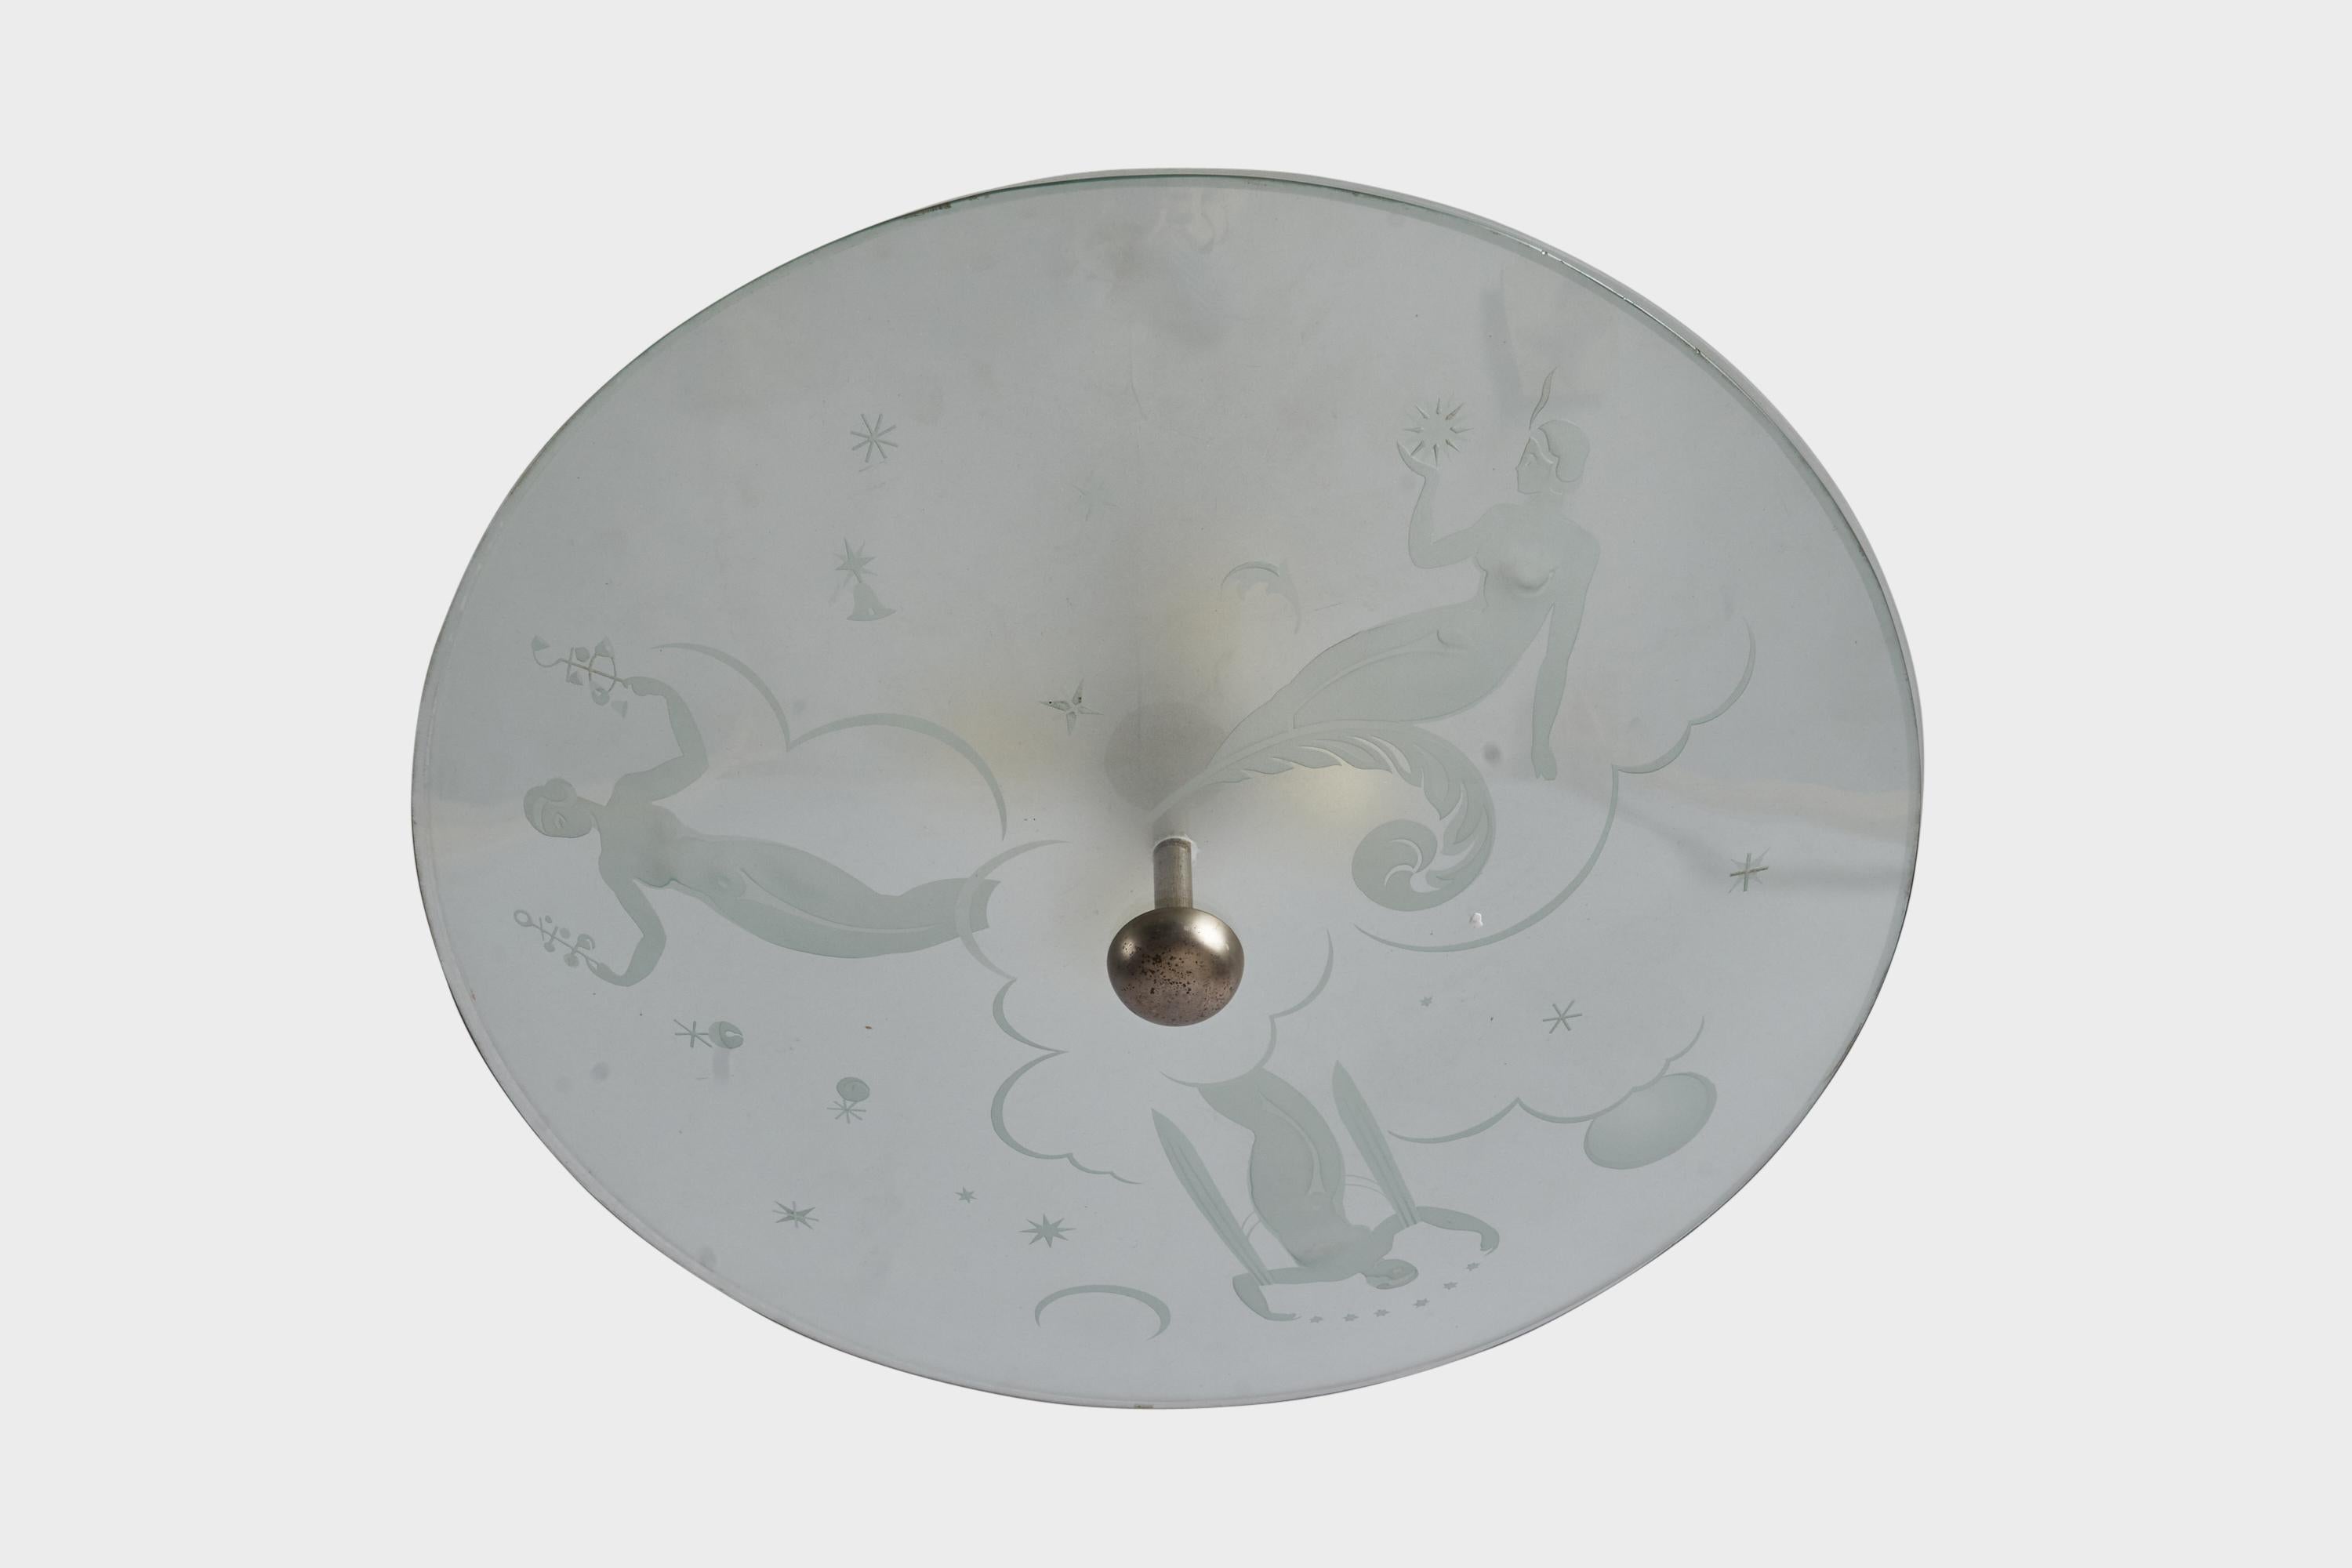 A brass and semi-frosted glass pendant attributed to Gio Ponti, Italy, 1940s.

Overall Dimensions (inches): 14.5” H x 20” Diameter
Back Plate Dimensions (inches): 2.75” Diameter
Bulb Specifications: E-26 Bulb
Number of Sockets: 4
All lighting will